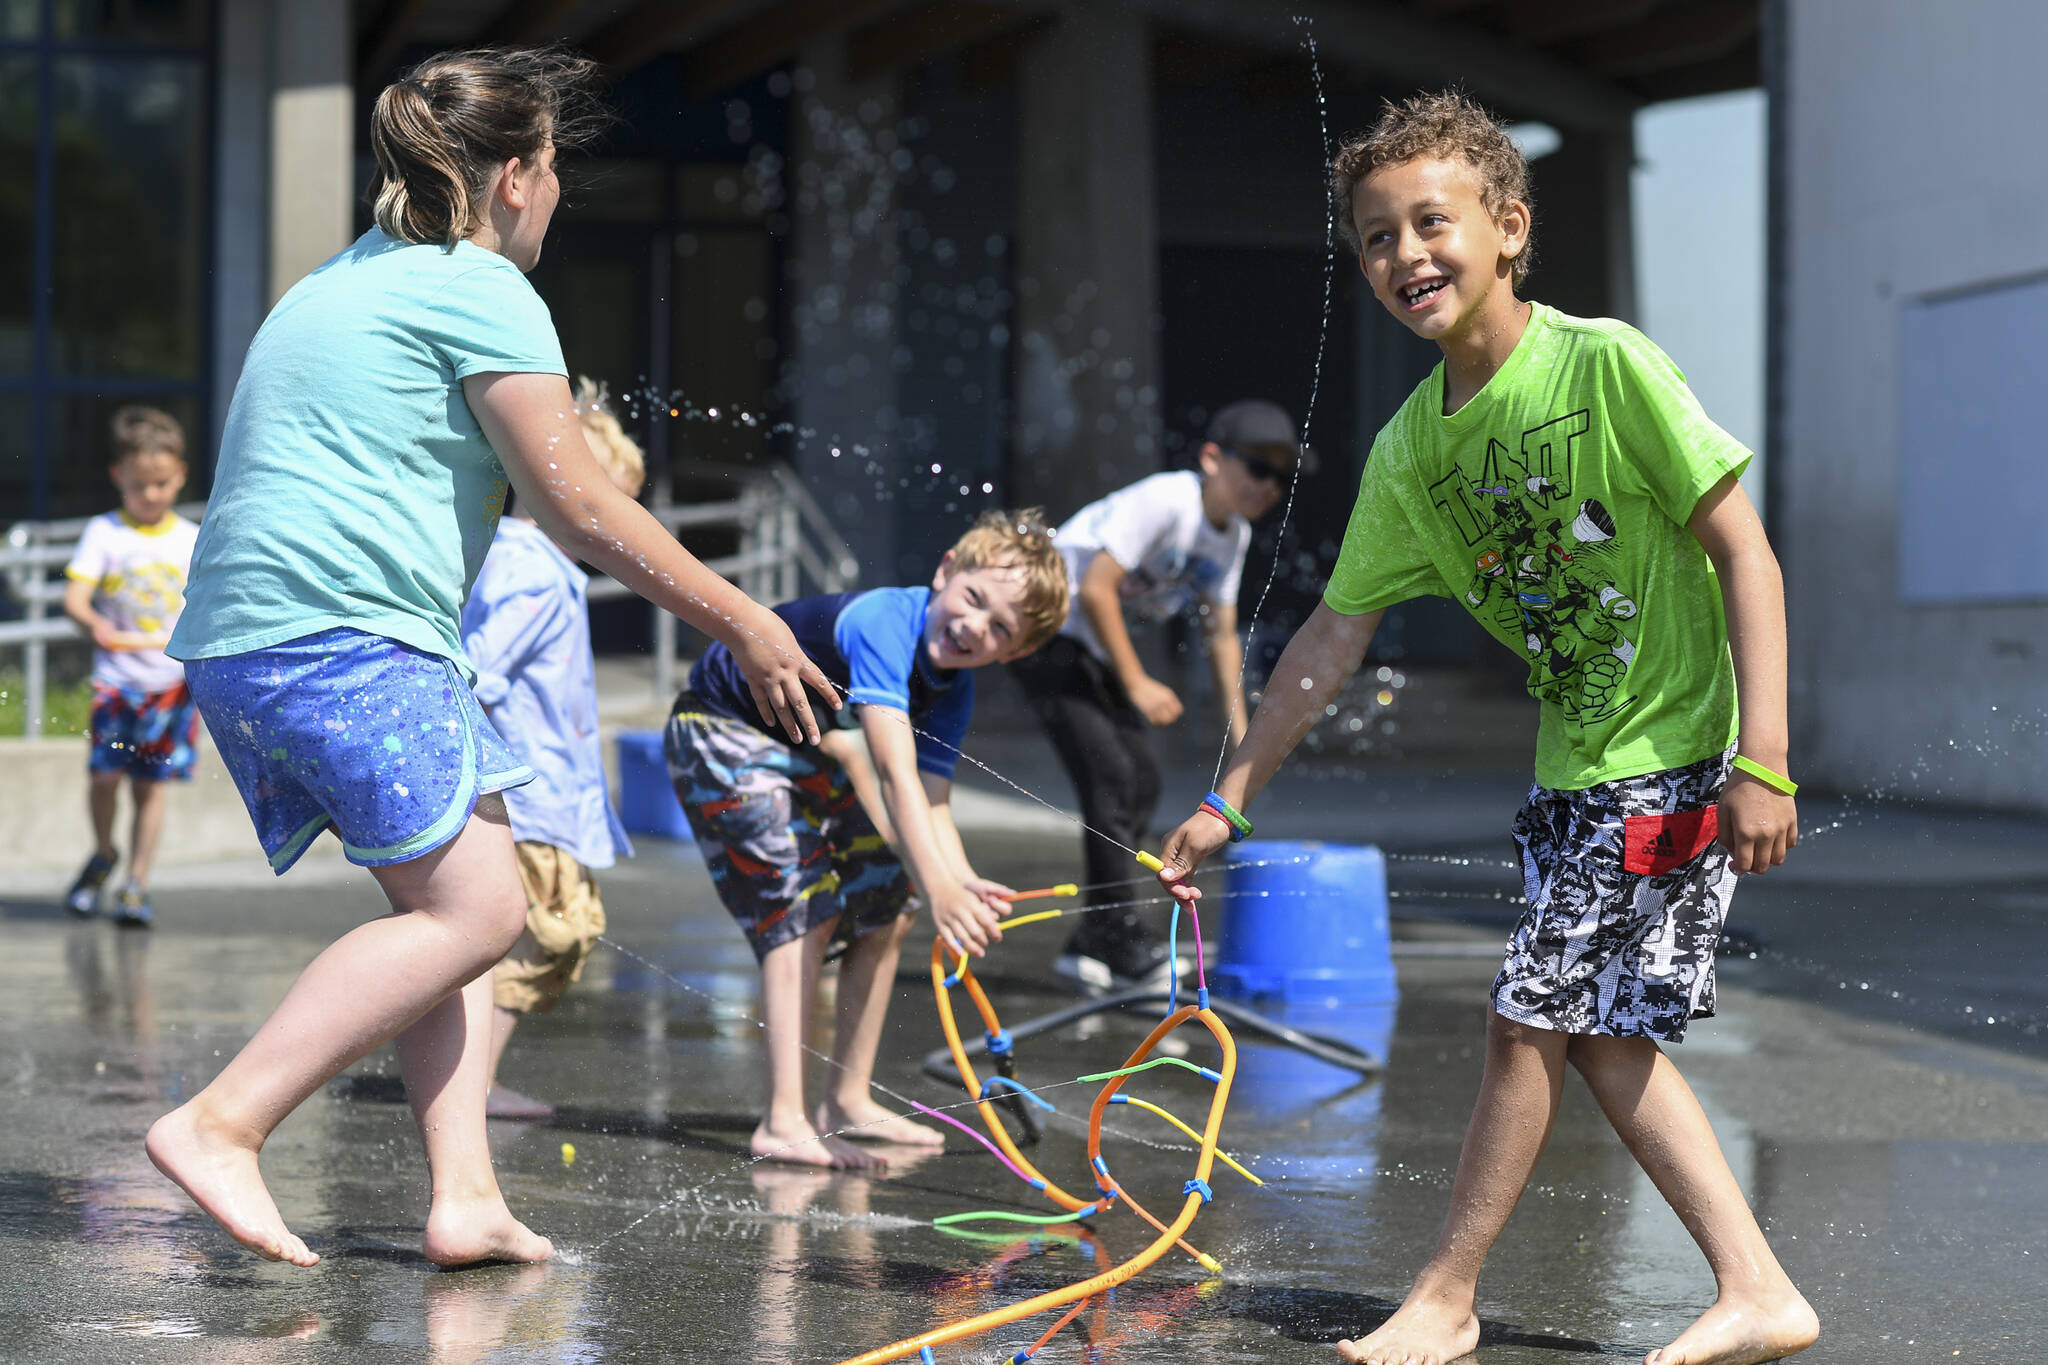 David Kimbrough, 7, right, Clayton Haywood, 6, center, and Kyla Belcourt, 8, play in sprinklers set up during the RALLY program at Harborview Elementary School on Wednesday, June 26, 2019. RALLY provides before- and after-school care to families with school-age children and offers care during school breaks. Recently, some parents have complained that the price of the program is too high. Meanwhile, school officials say RALLY routinely loses money and that changes are needed to make it more sustainable. (Michael Penn / Juneau Empire File)